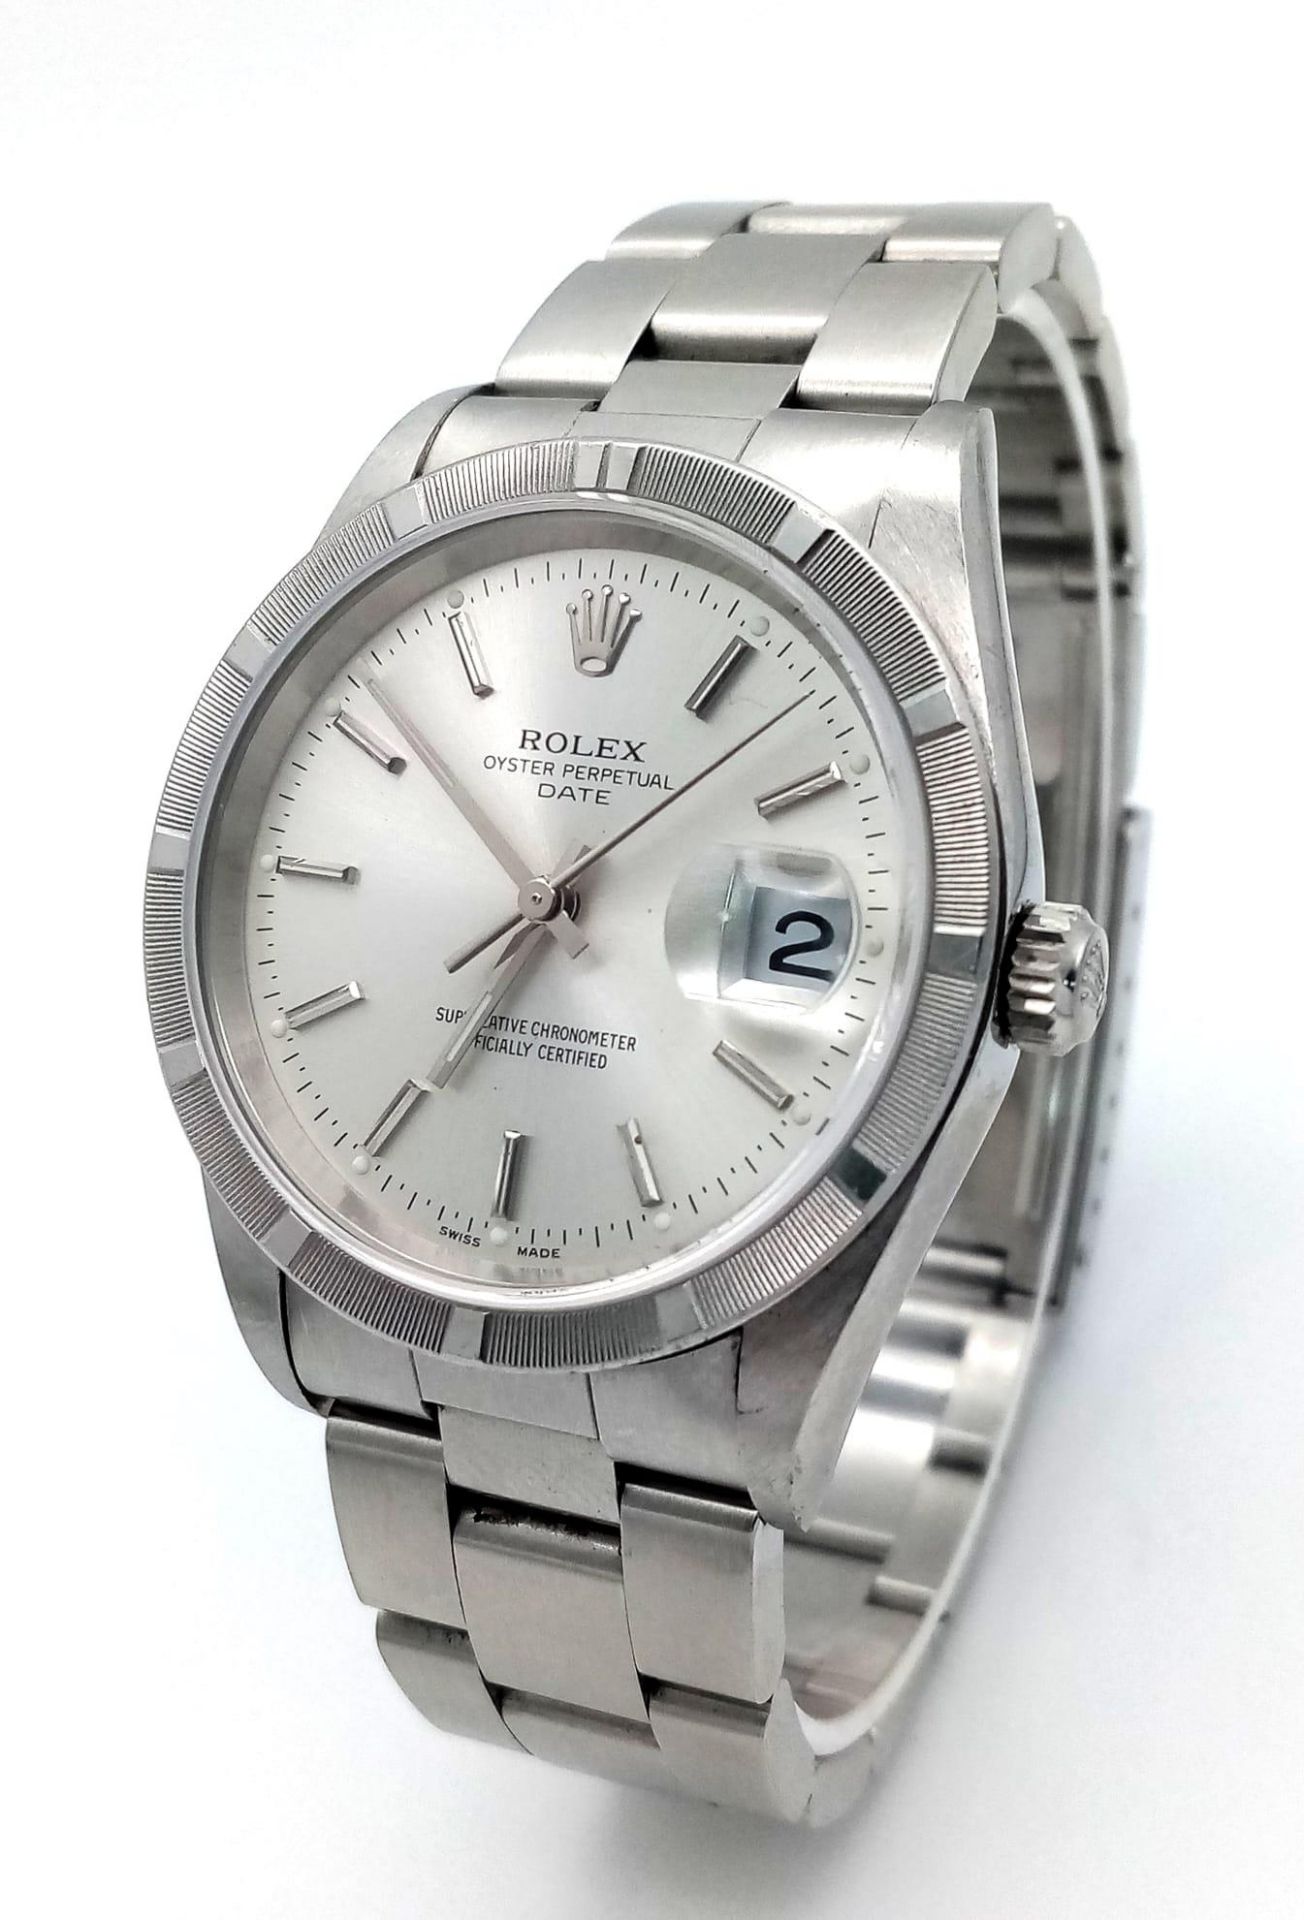 A Rolex Oyster Perpetual Datejust Gents Watch. Stainless steel bracelet and case - 35mm. Silver tone